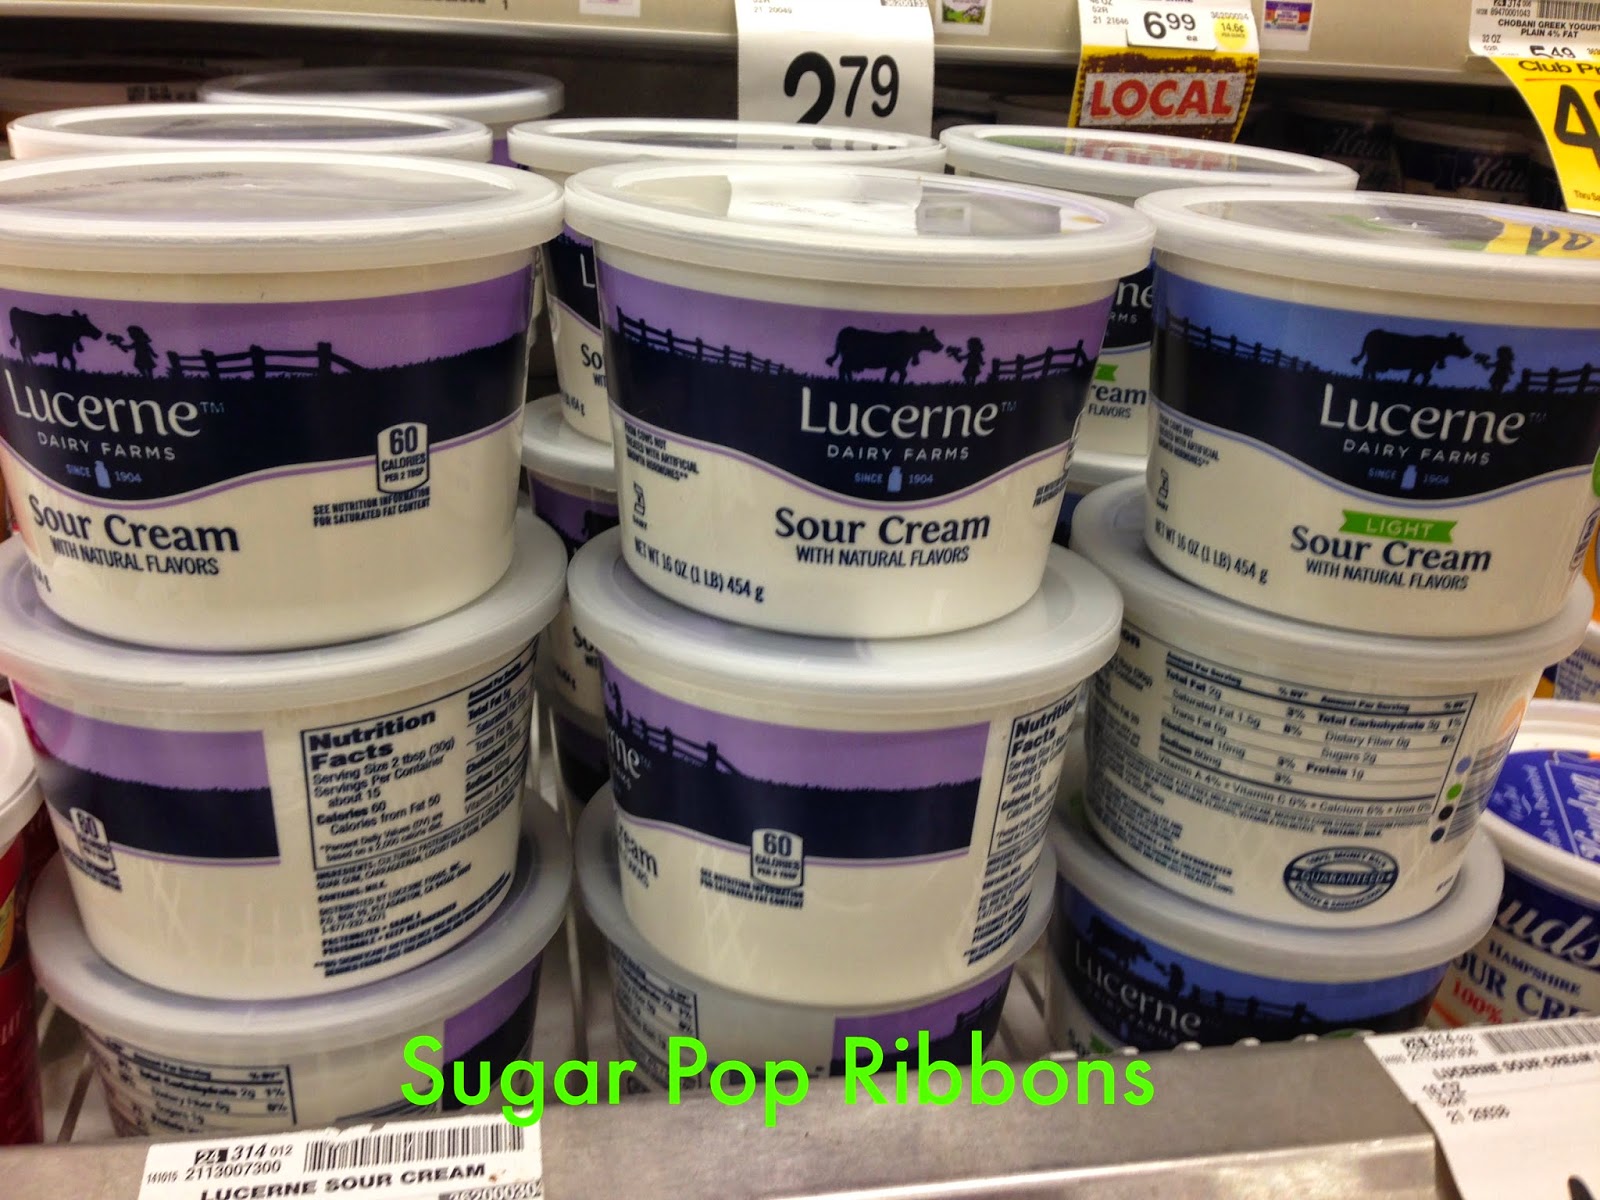 What are Lucerne dairy products?